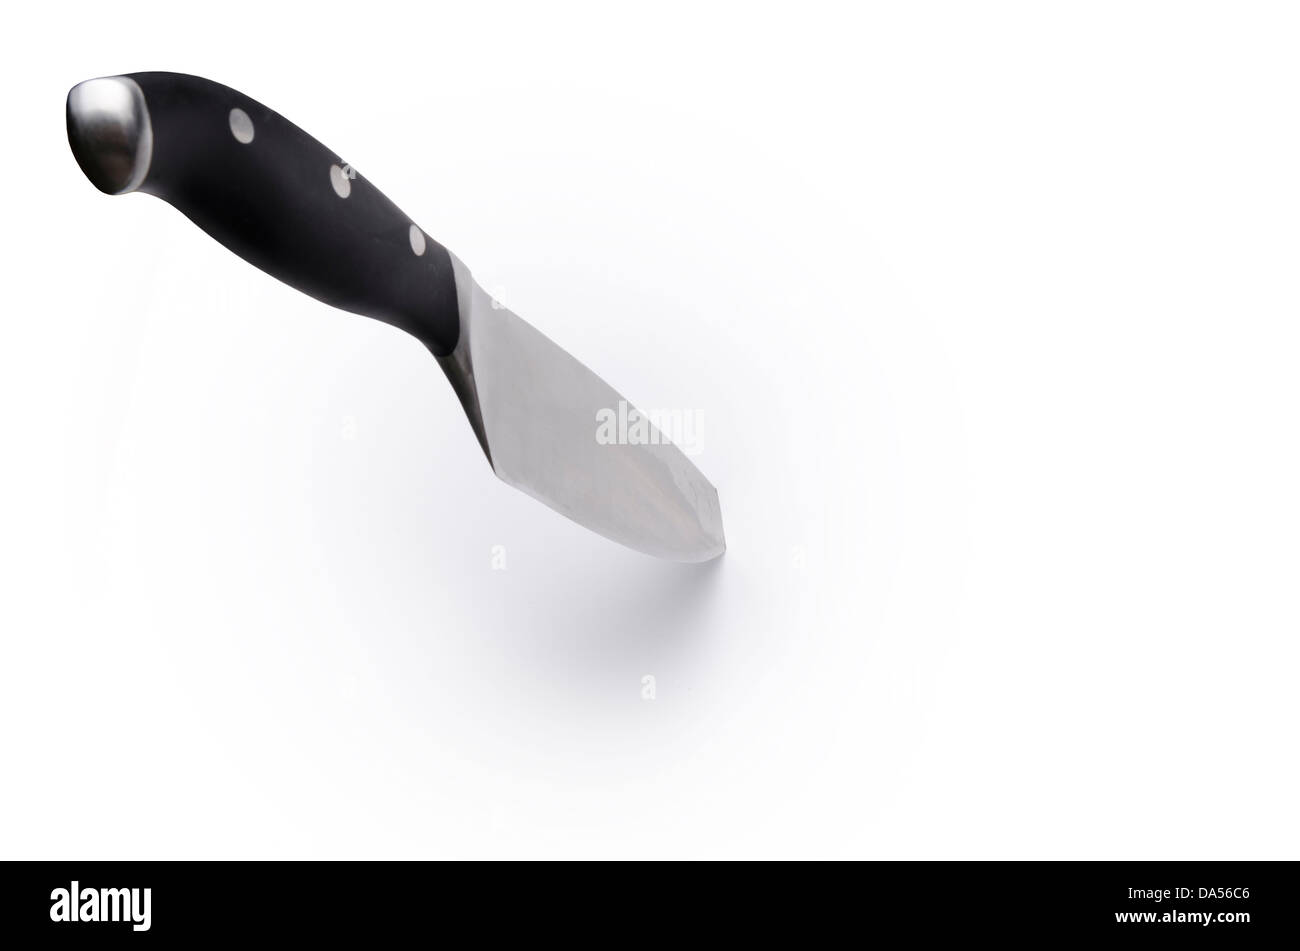 kitchen knife stuck in the white background Stock Photo